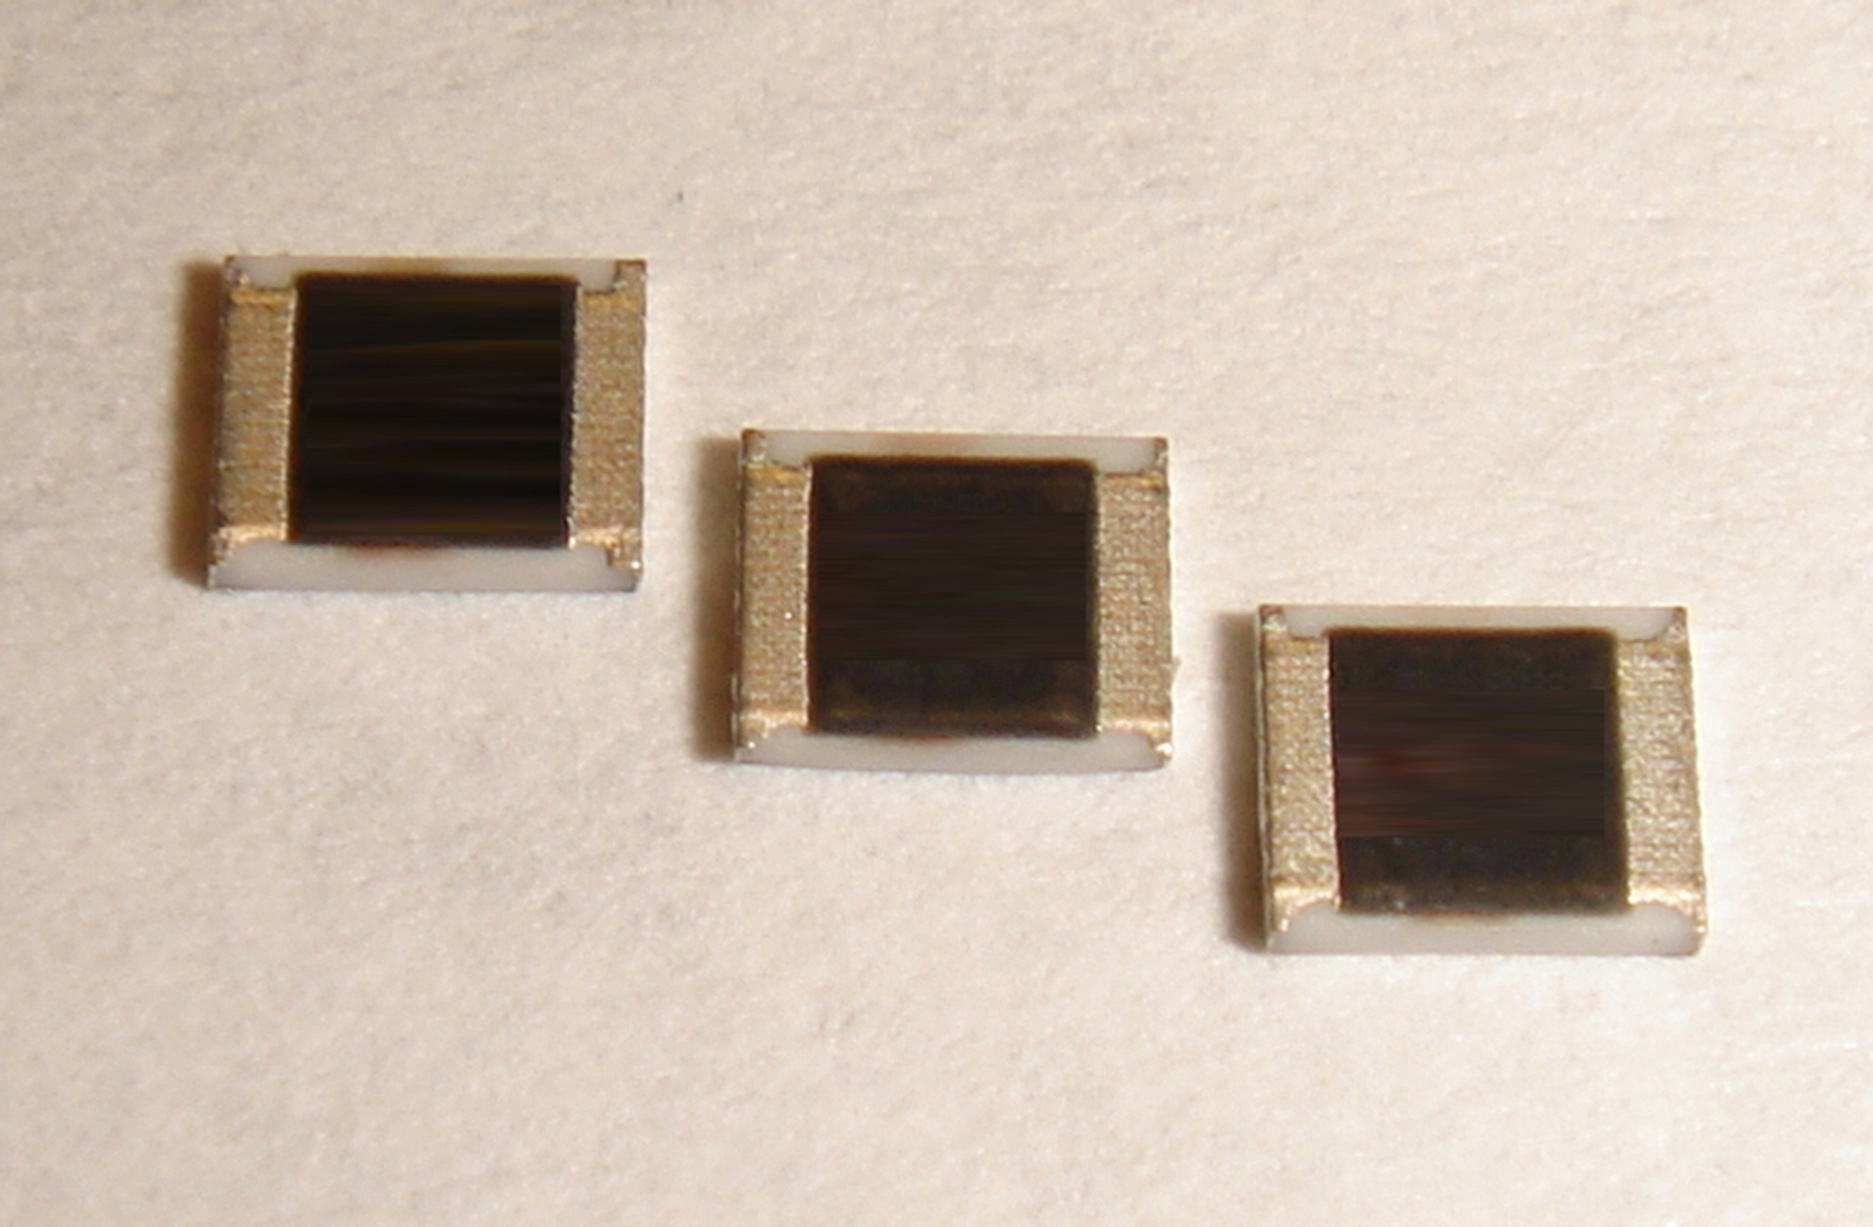 Current-Sensing Chip Resistor Offers Power Rating up to 5W